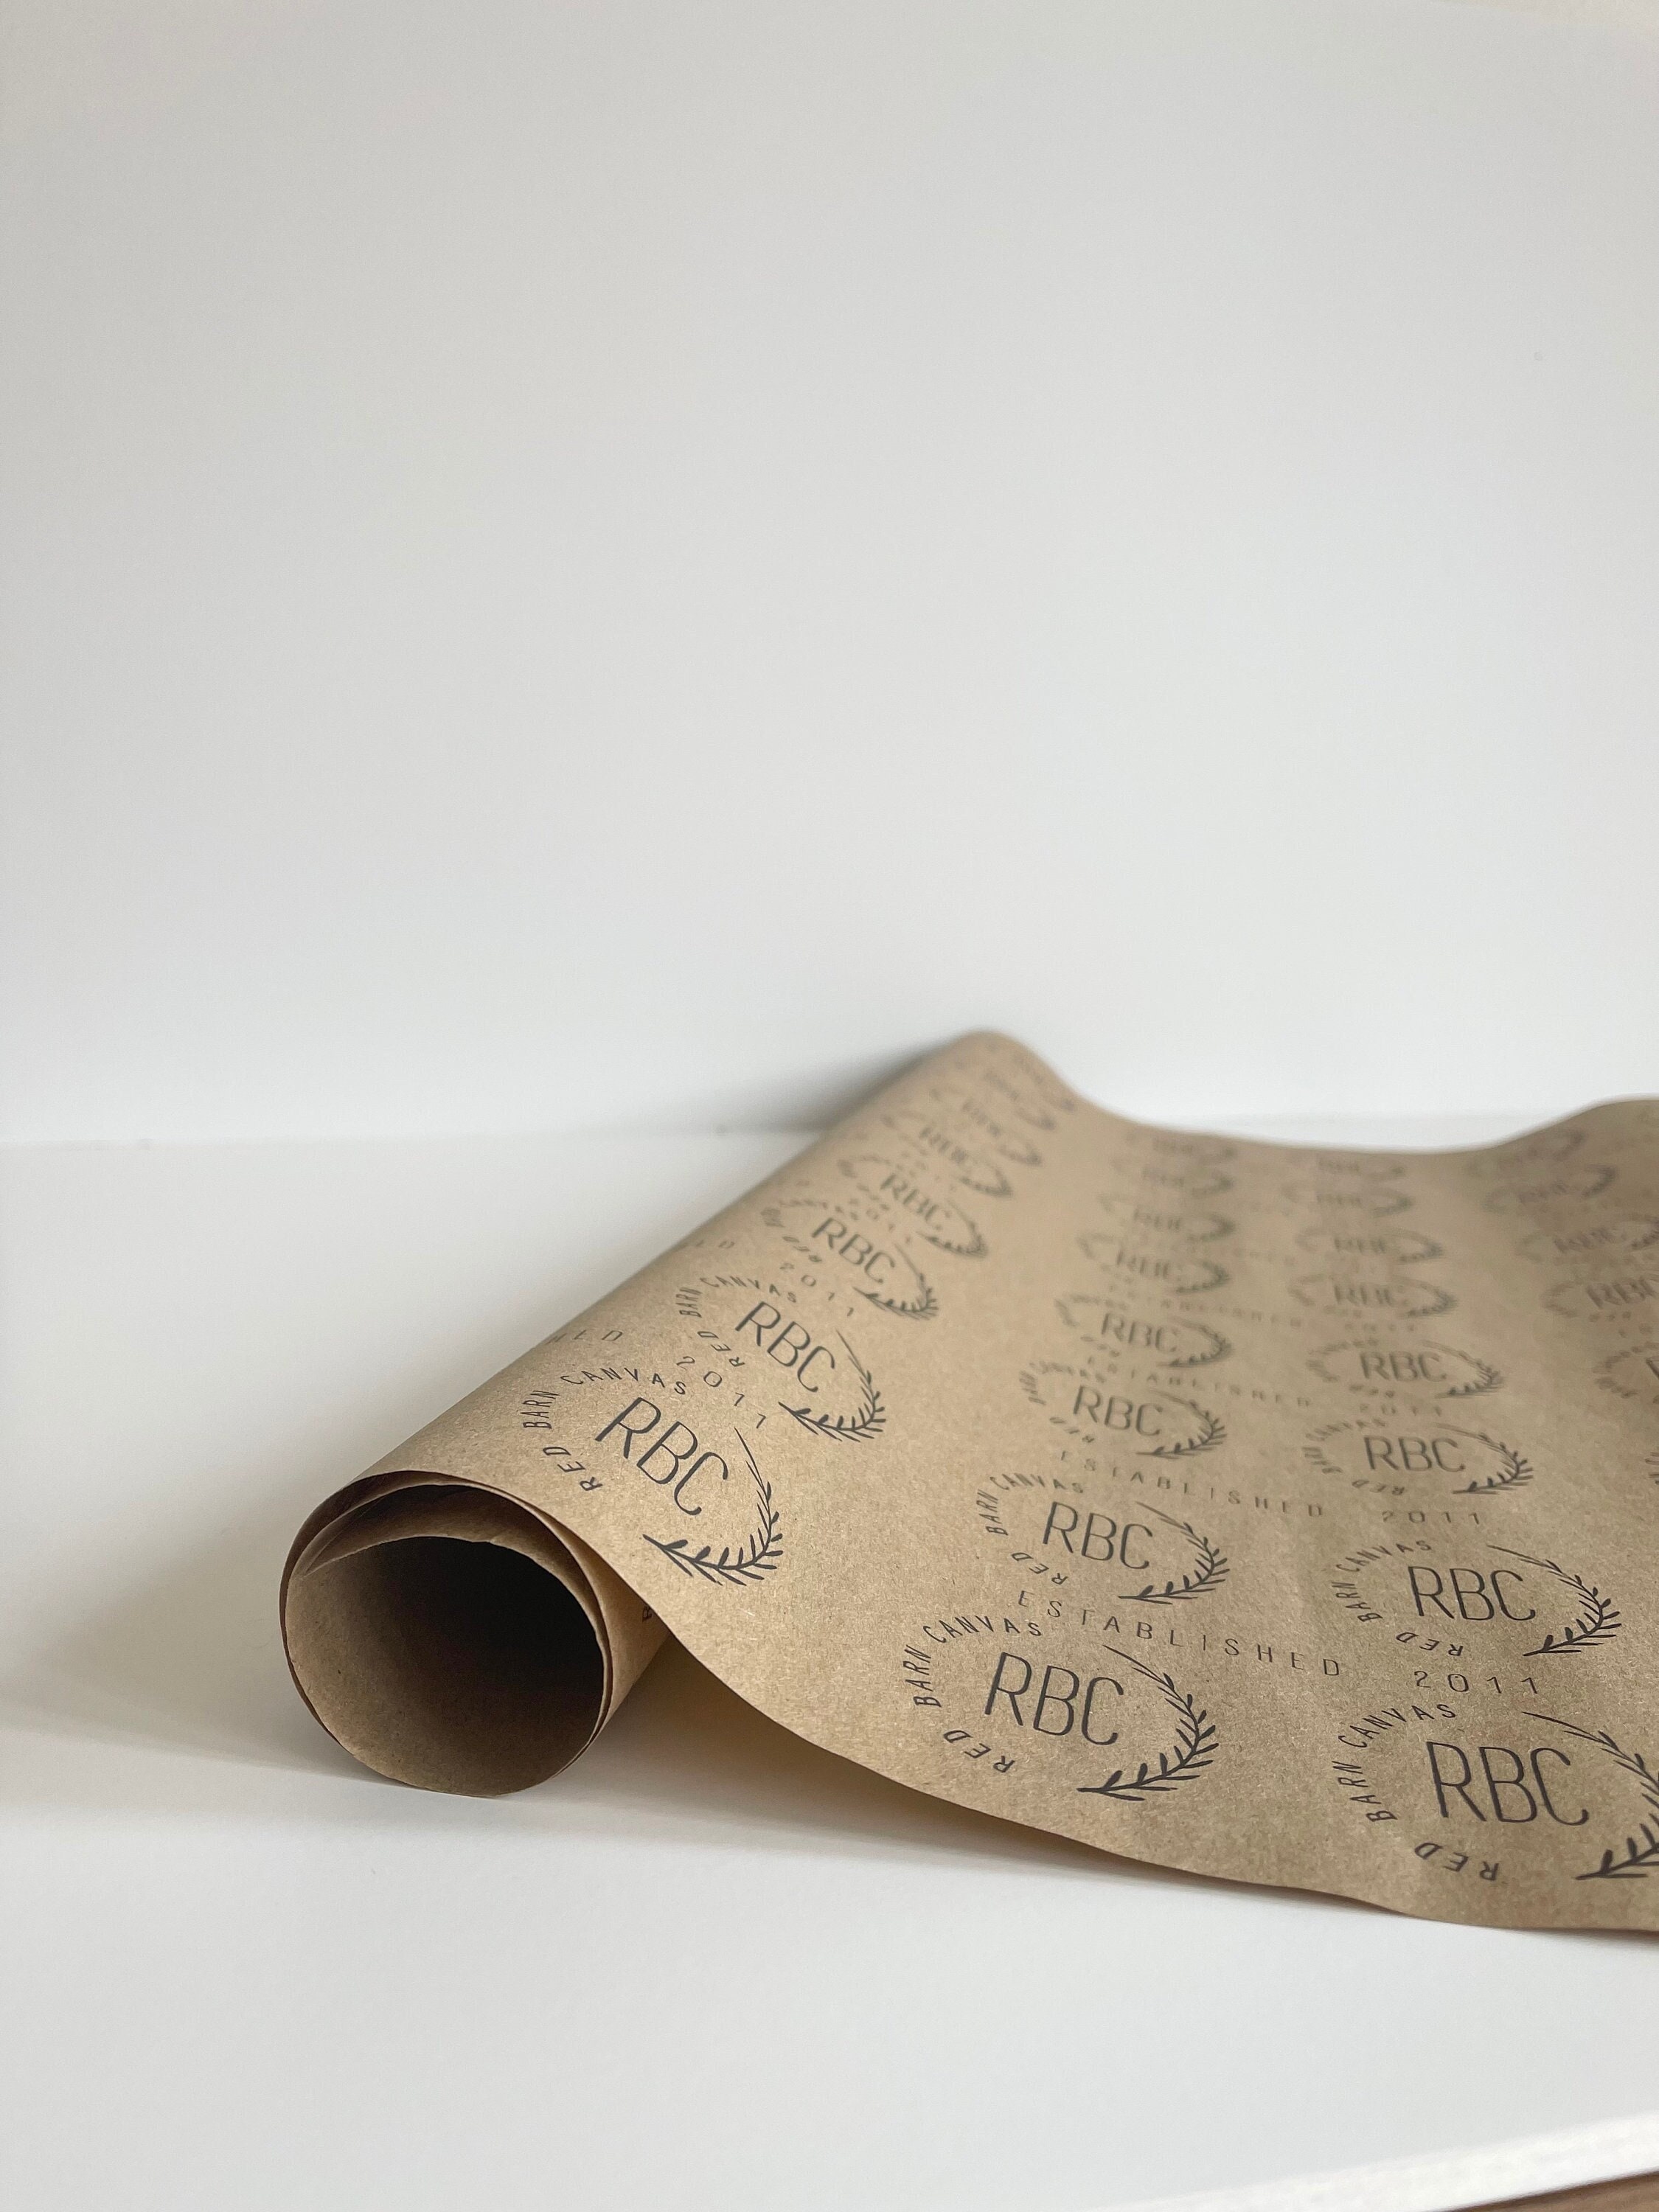 Louis Vuitton Wrapping Paper - wrapping paper custom diy cyo personalize  unique present gift idea